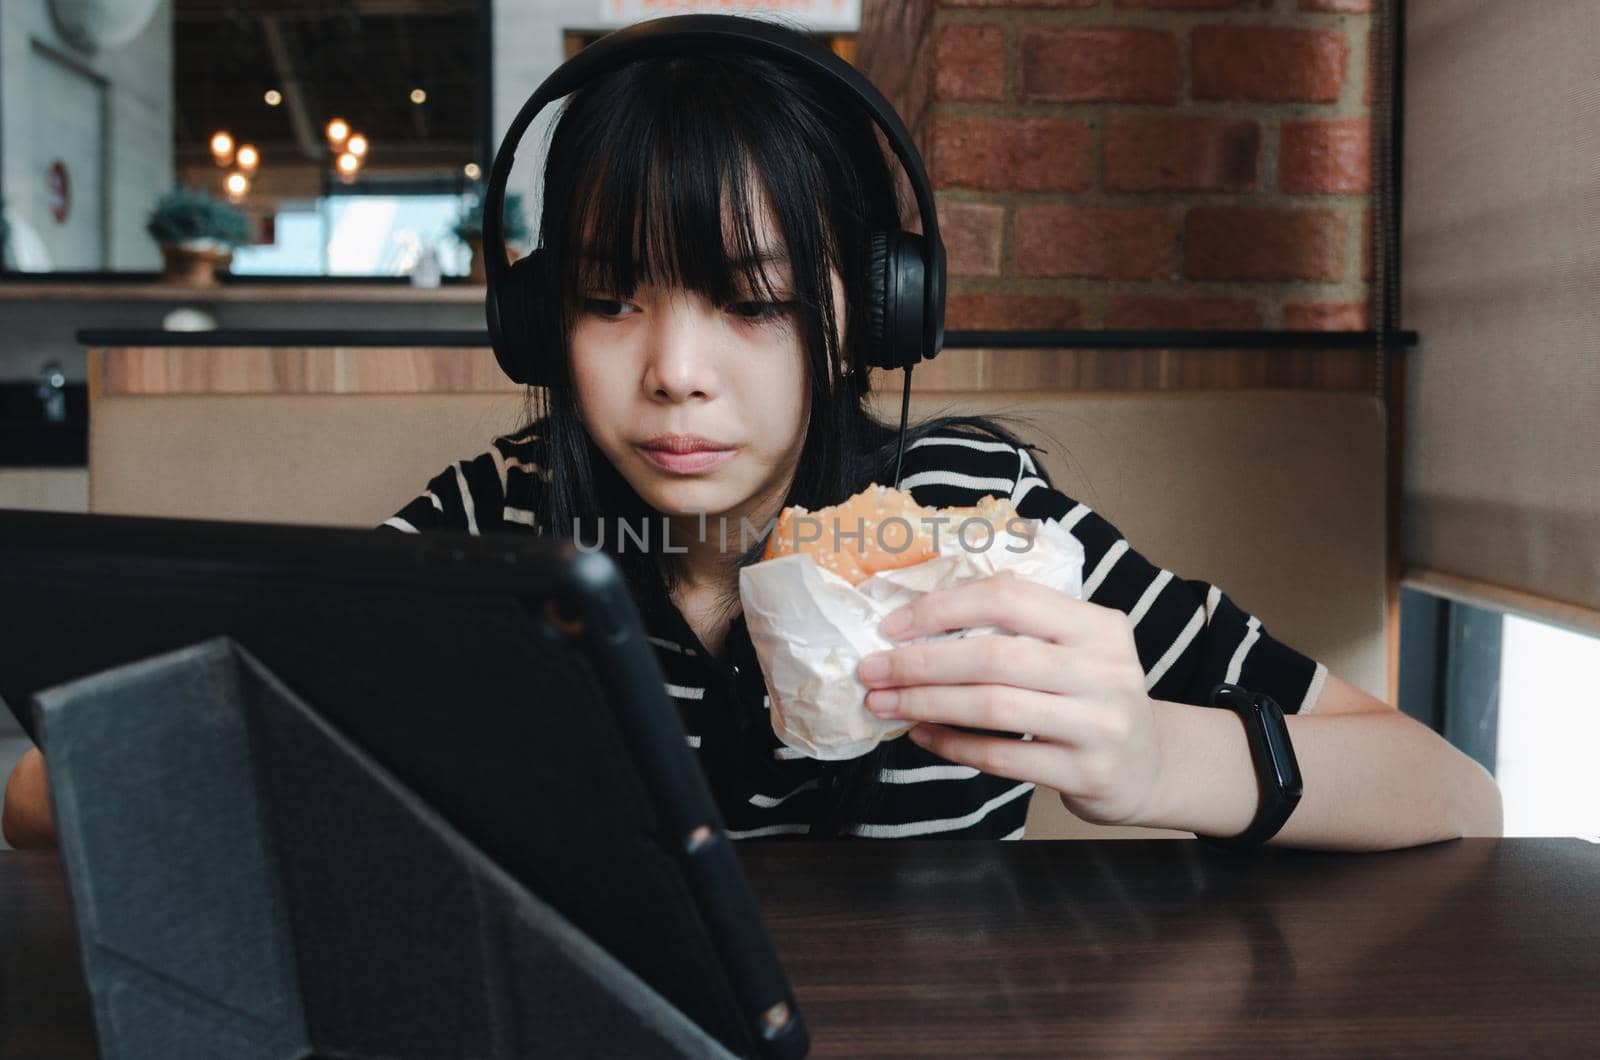 Girl eating burger watch your tablet and use headphones to listen to music or use social media.